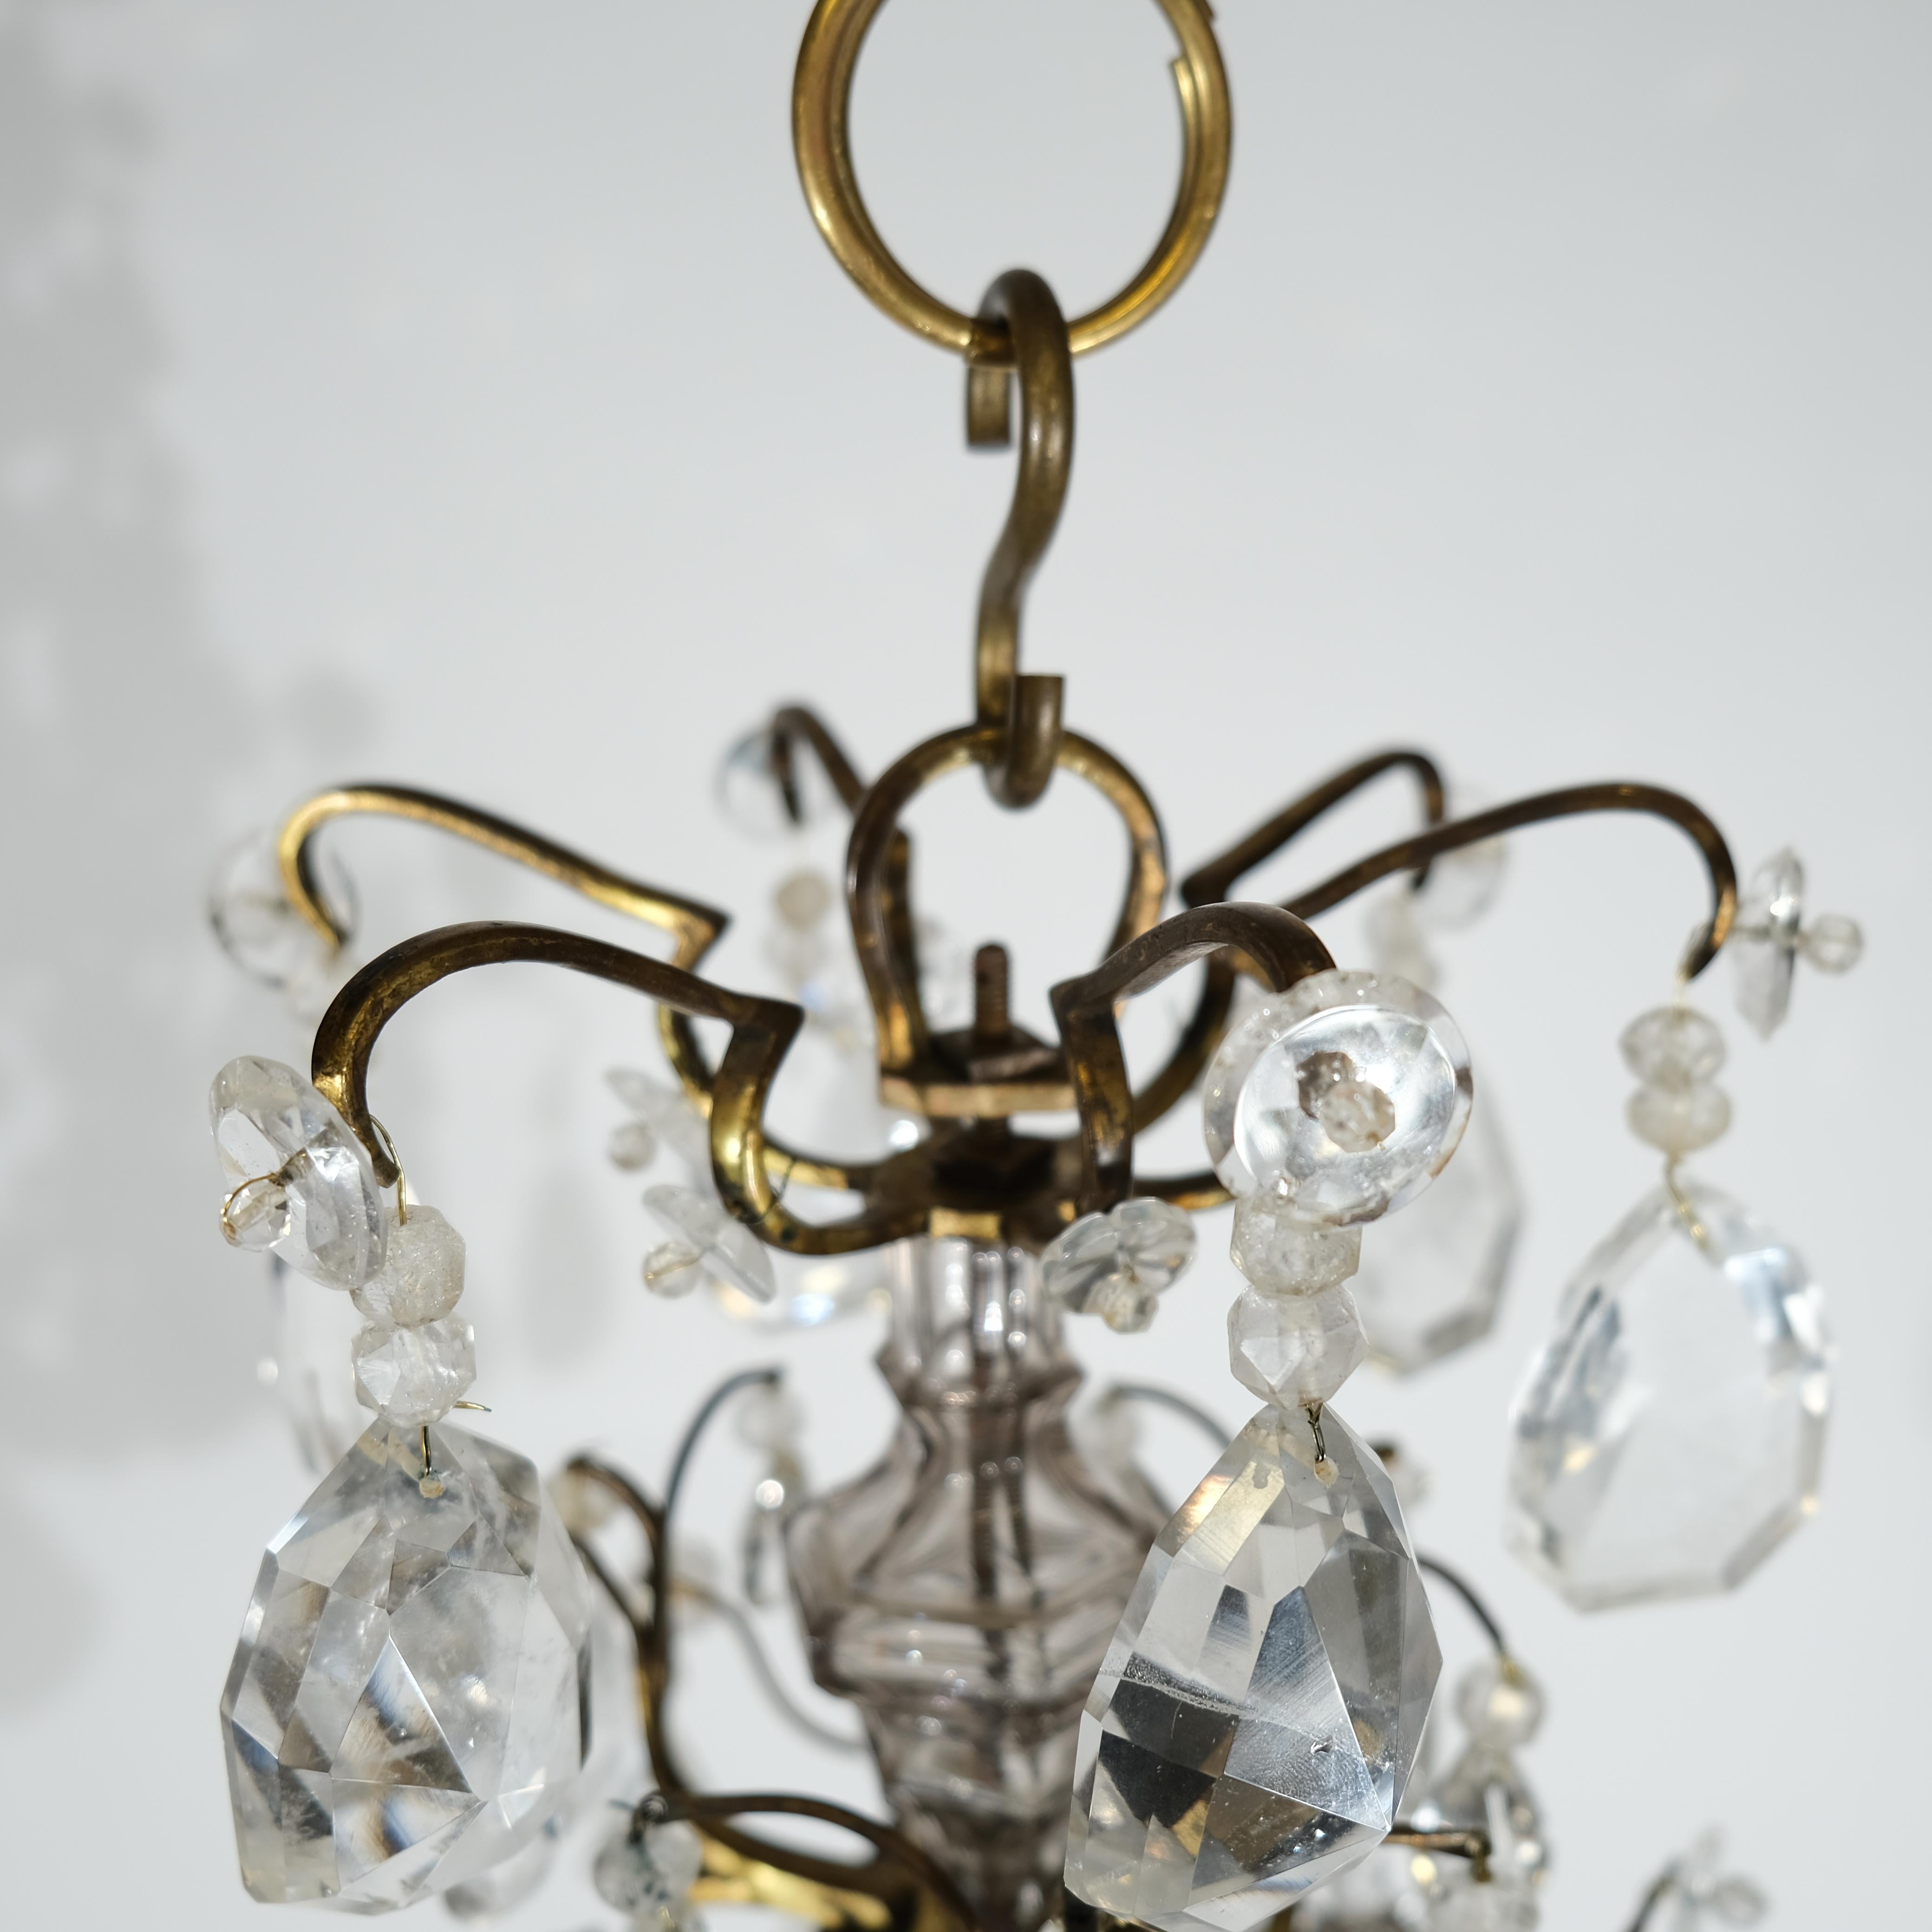 19th Century Small Baroque Style Chandelier with Exquisite Rock Crystals. 19th c.